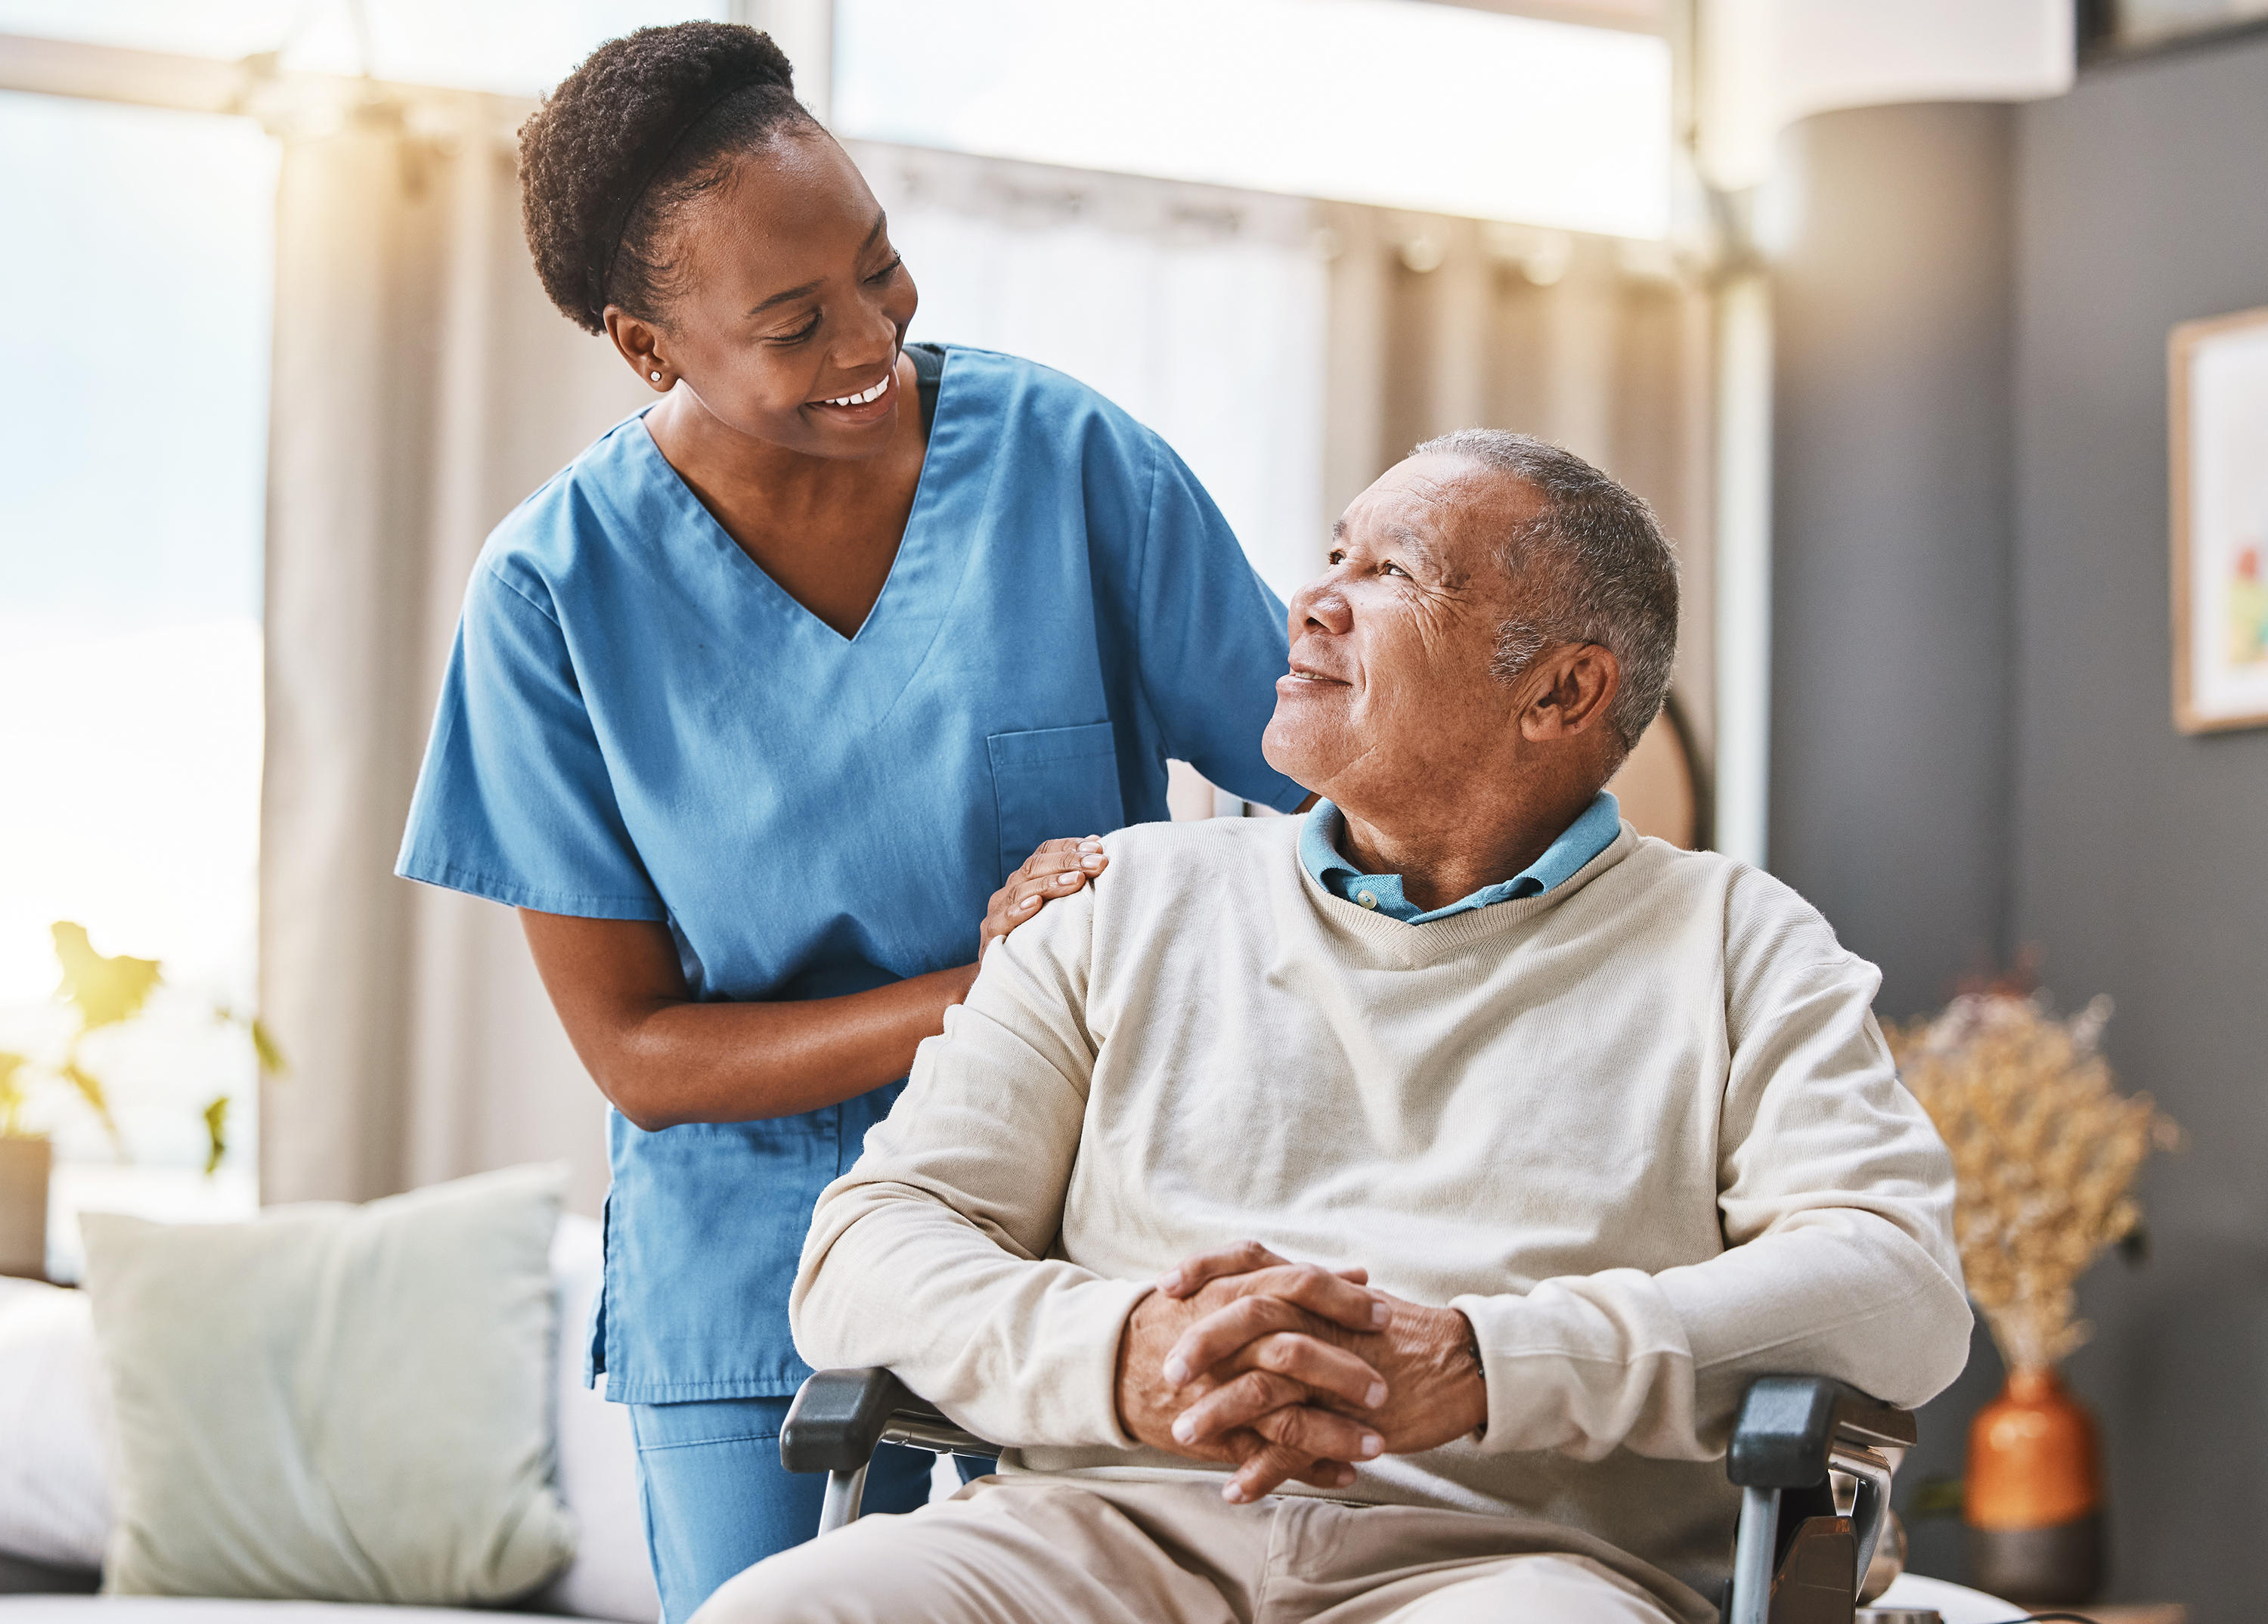 Need In-Home Care in Pittsburgh? We can provide quality and affordable care in the comfort of your o Sunny Days In-Home Care Canonsburg (724)260-5186